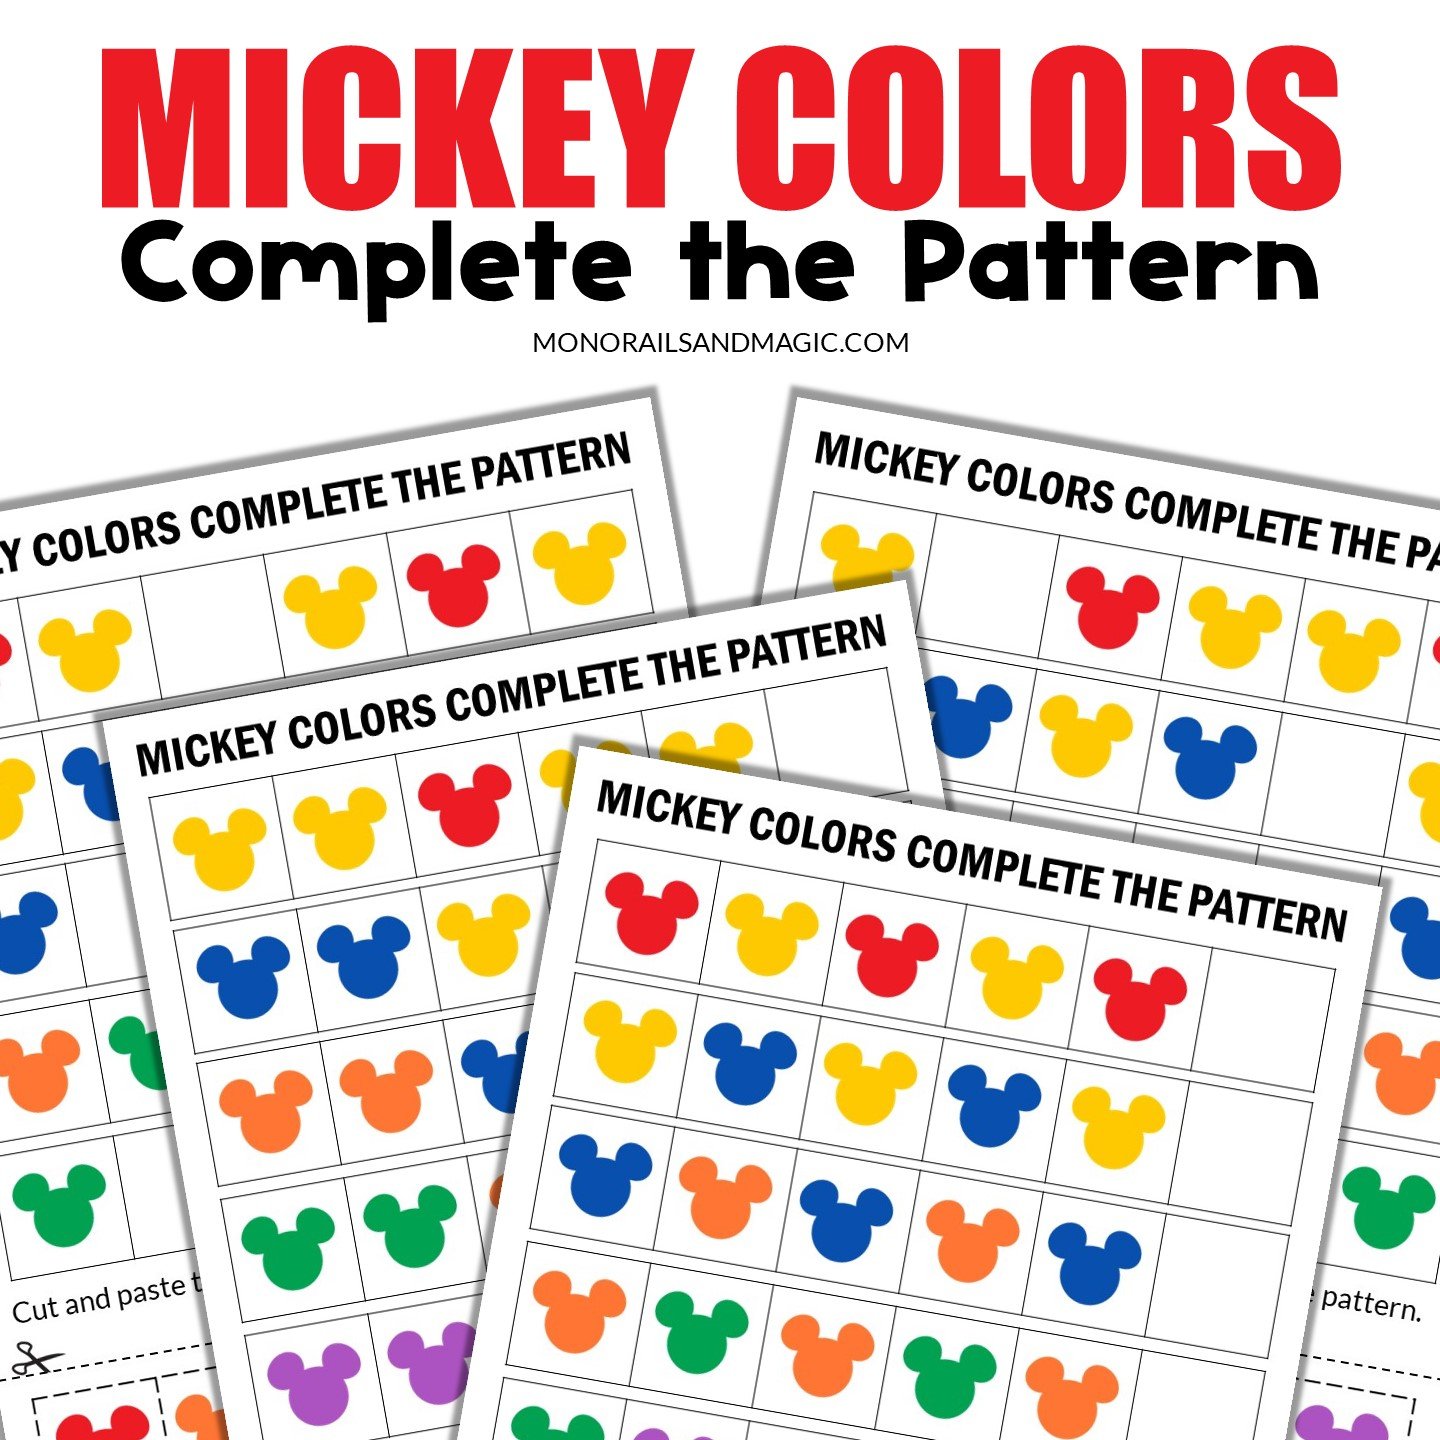 Free printable Mickey colors complete the pattern pages for kids.